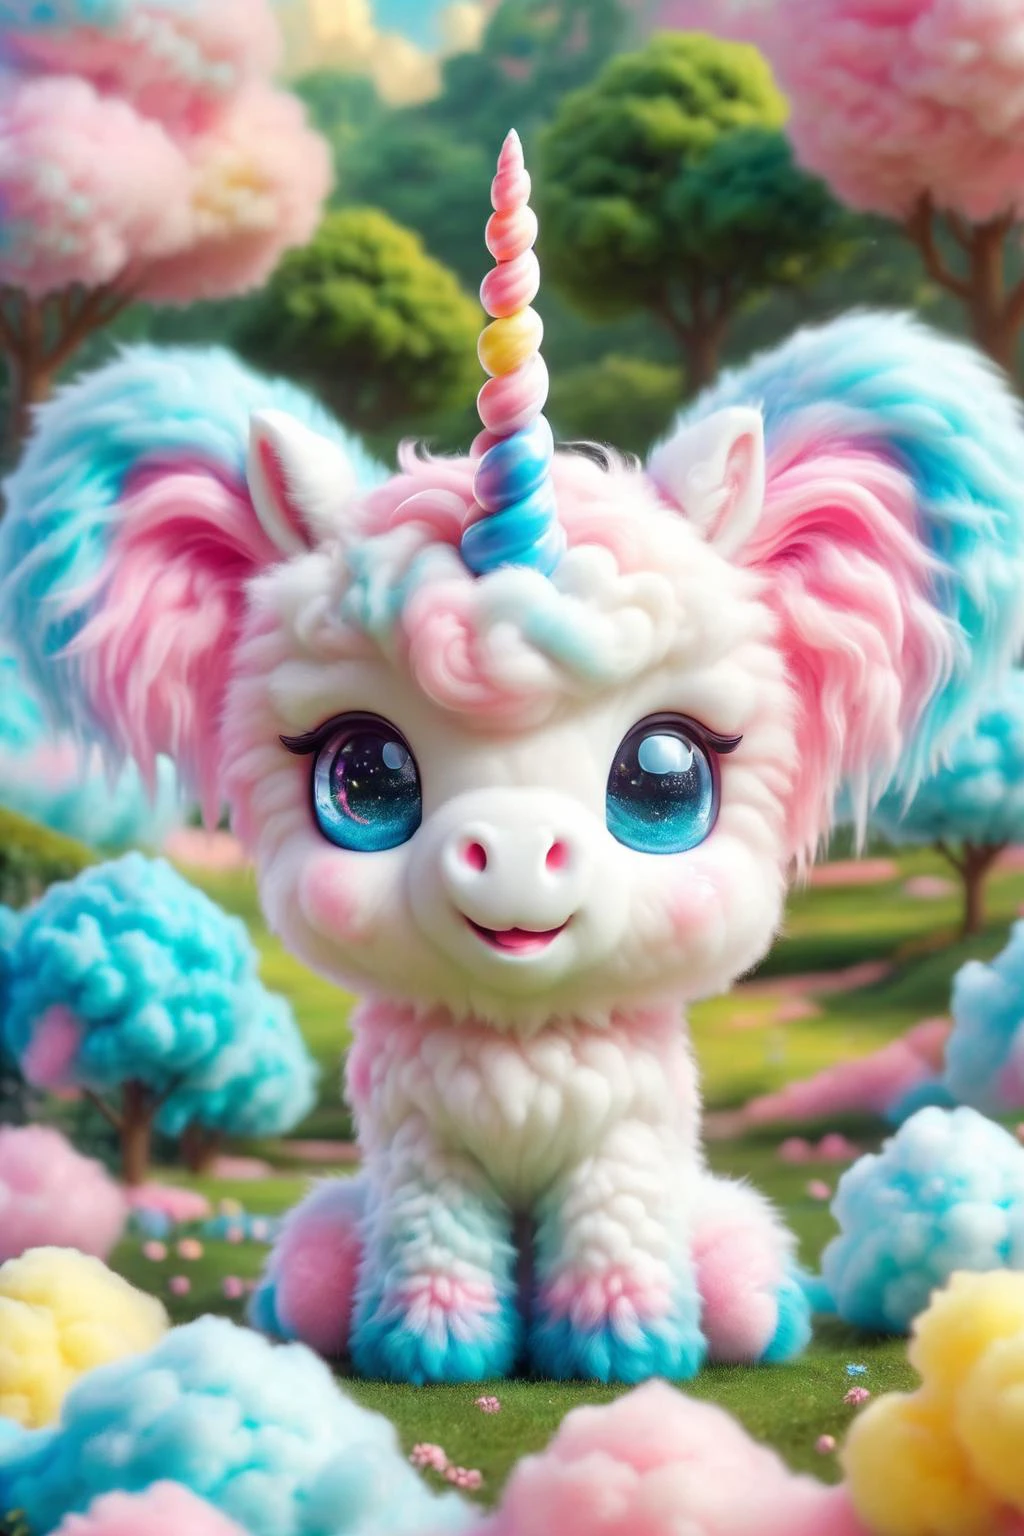 cottoncandy,
In a whimsical candy kingdom,there stands a unicorn crafted from marshmallows,exuding childlike wonder and an air of mystery. Its body is as white and fluffy as a cloud,embodying the spirit of a playful sprite emerging from sweet dreams,
Its head features a radiant rainbow candy gem that forms the iconic horn,shining with seven-colored brilliance,seemingly illuminating every innocent aspiration. The eyes are crafted from translucent hard candies,filled with tender yet inquisitive expressions,
The mane consists of multi-hued strands of marshmallow fluff,each one dazzling like a rainbow,swaying gently in the breeze,whispering enchanting tales. Its tail resembles a billowy marshmallow cloud,soft and dreamy; when it gallops joyfully,it leaves behind a trail of vibrant marshmallow magic,
Its hooves resemble those cast from creamy white chocolate,solid yet sweet,firmly planted on the ground made of colorful candies. This marshmallow unicorn stands tall,serving as both a tangible representation of children's naive fantasies and a mystical presence brimming with magical allure within the fairy tale world,
UHD,Extreme detail,natural light,volume light,fantasism,professional color,professional composition,